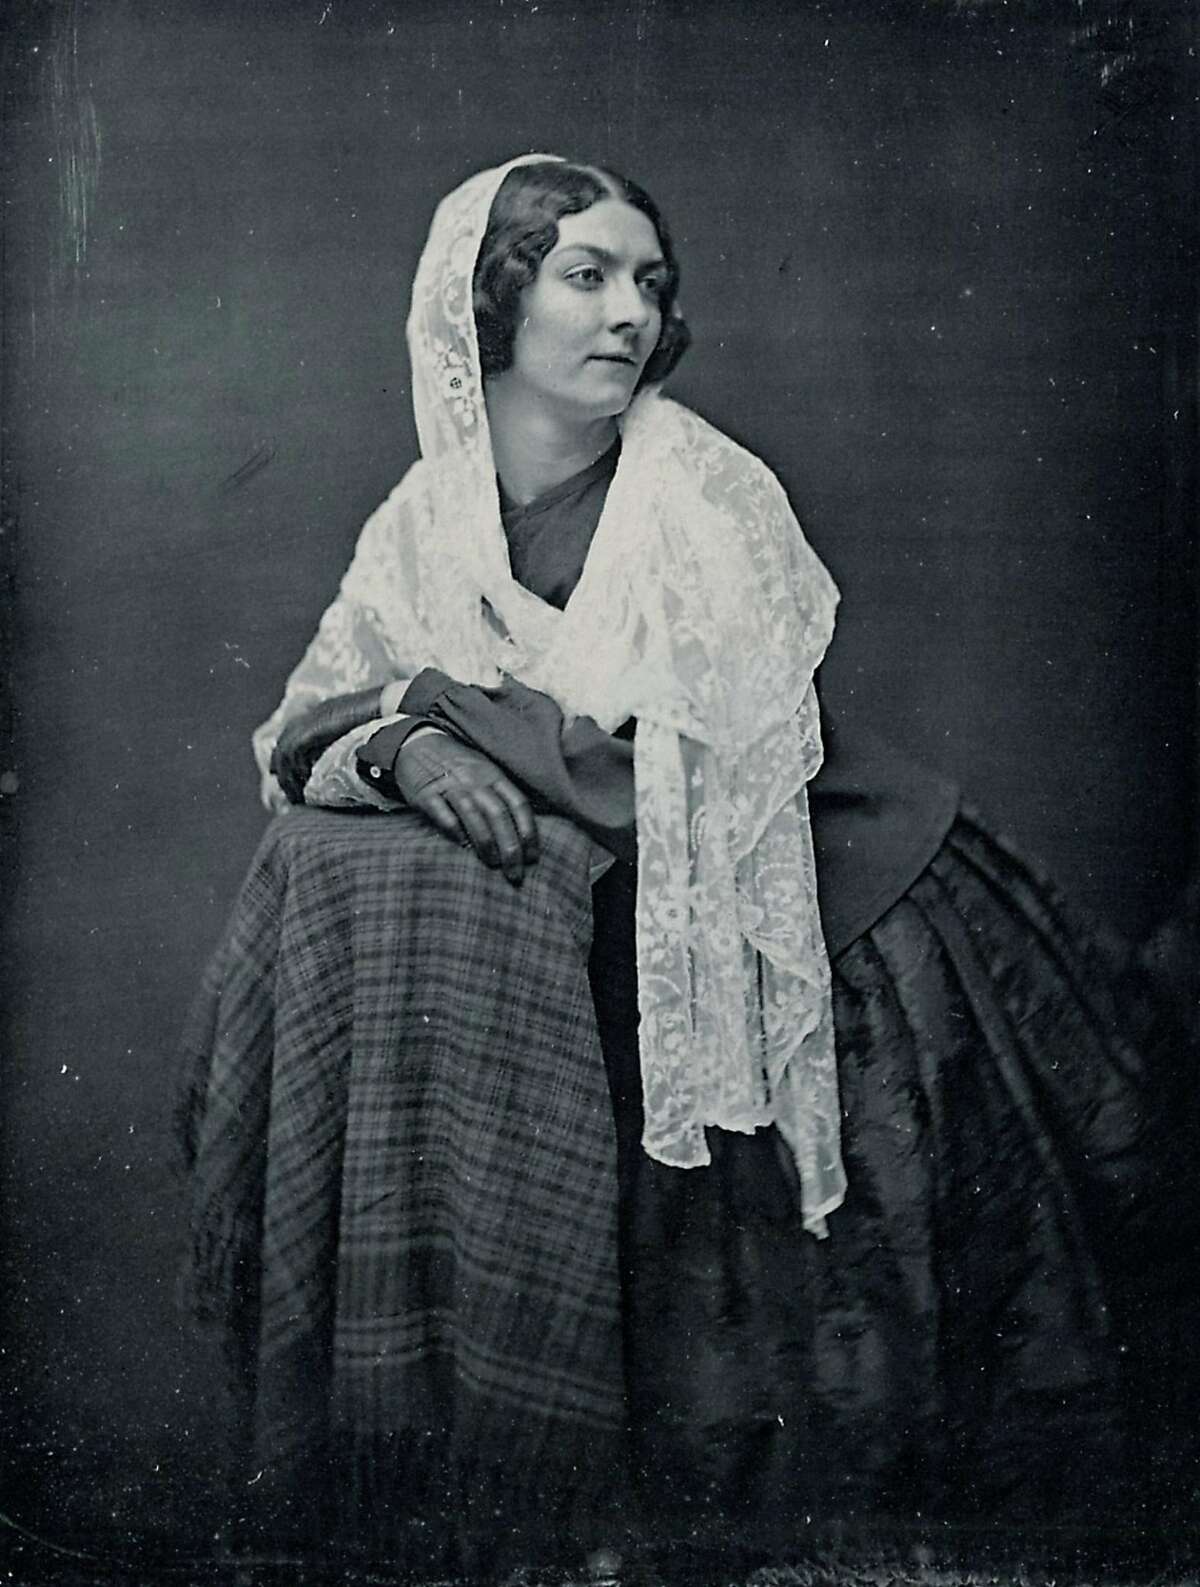 A daguerreotype of Lola Montez, taken in 1851. Montez took a young Lotta Crabtree under her wing and taught her song and dance routines.